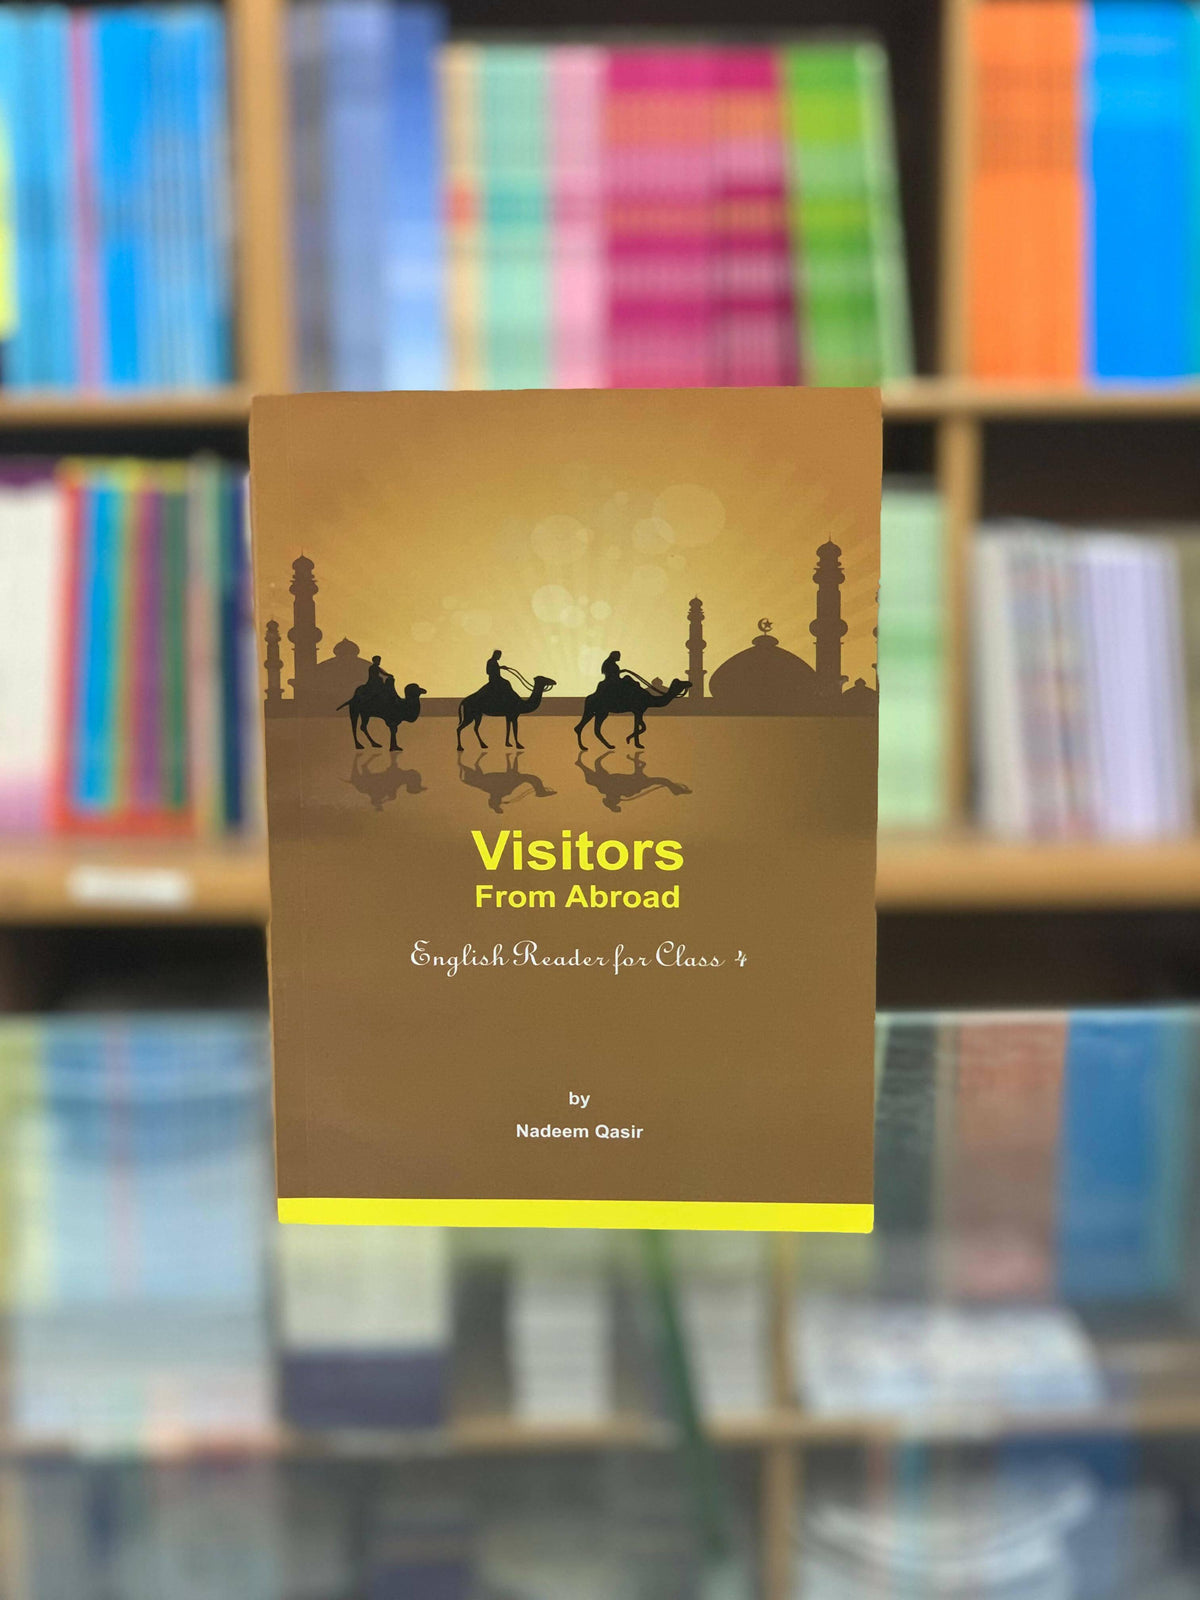 VISITORS FROM ABROAD ENGLISH READER FOR CLASS 4 BY NADEEM QASIR - ValueBox